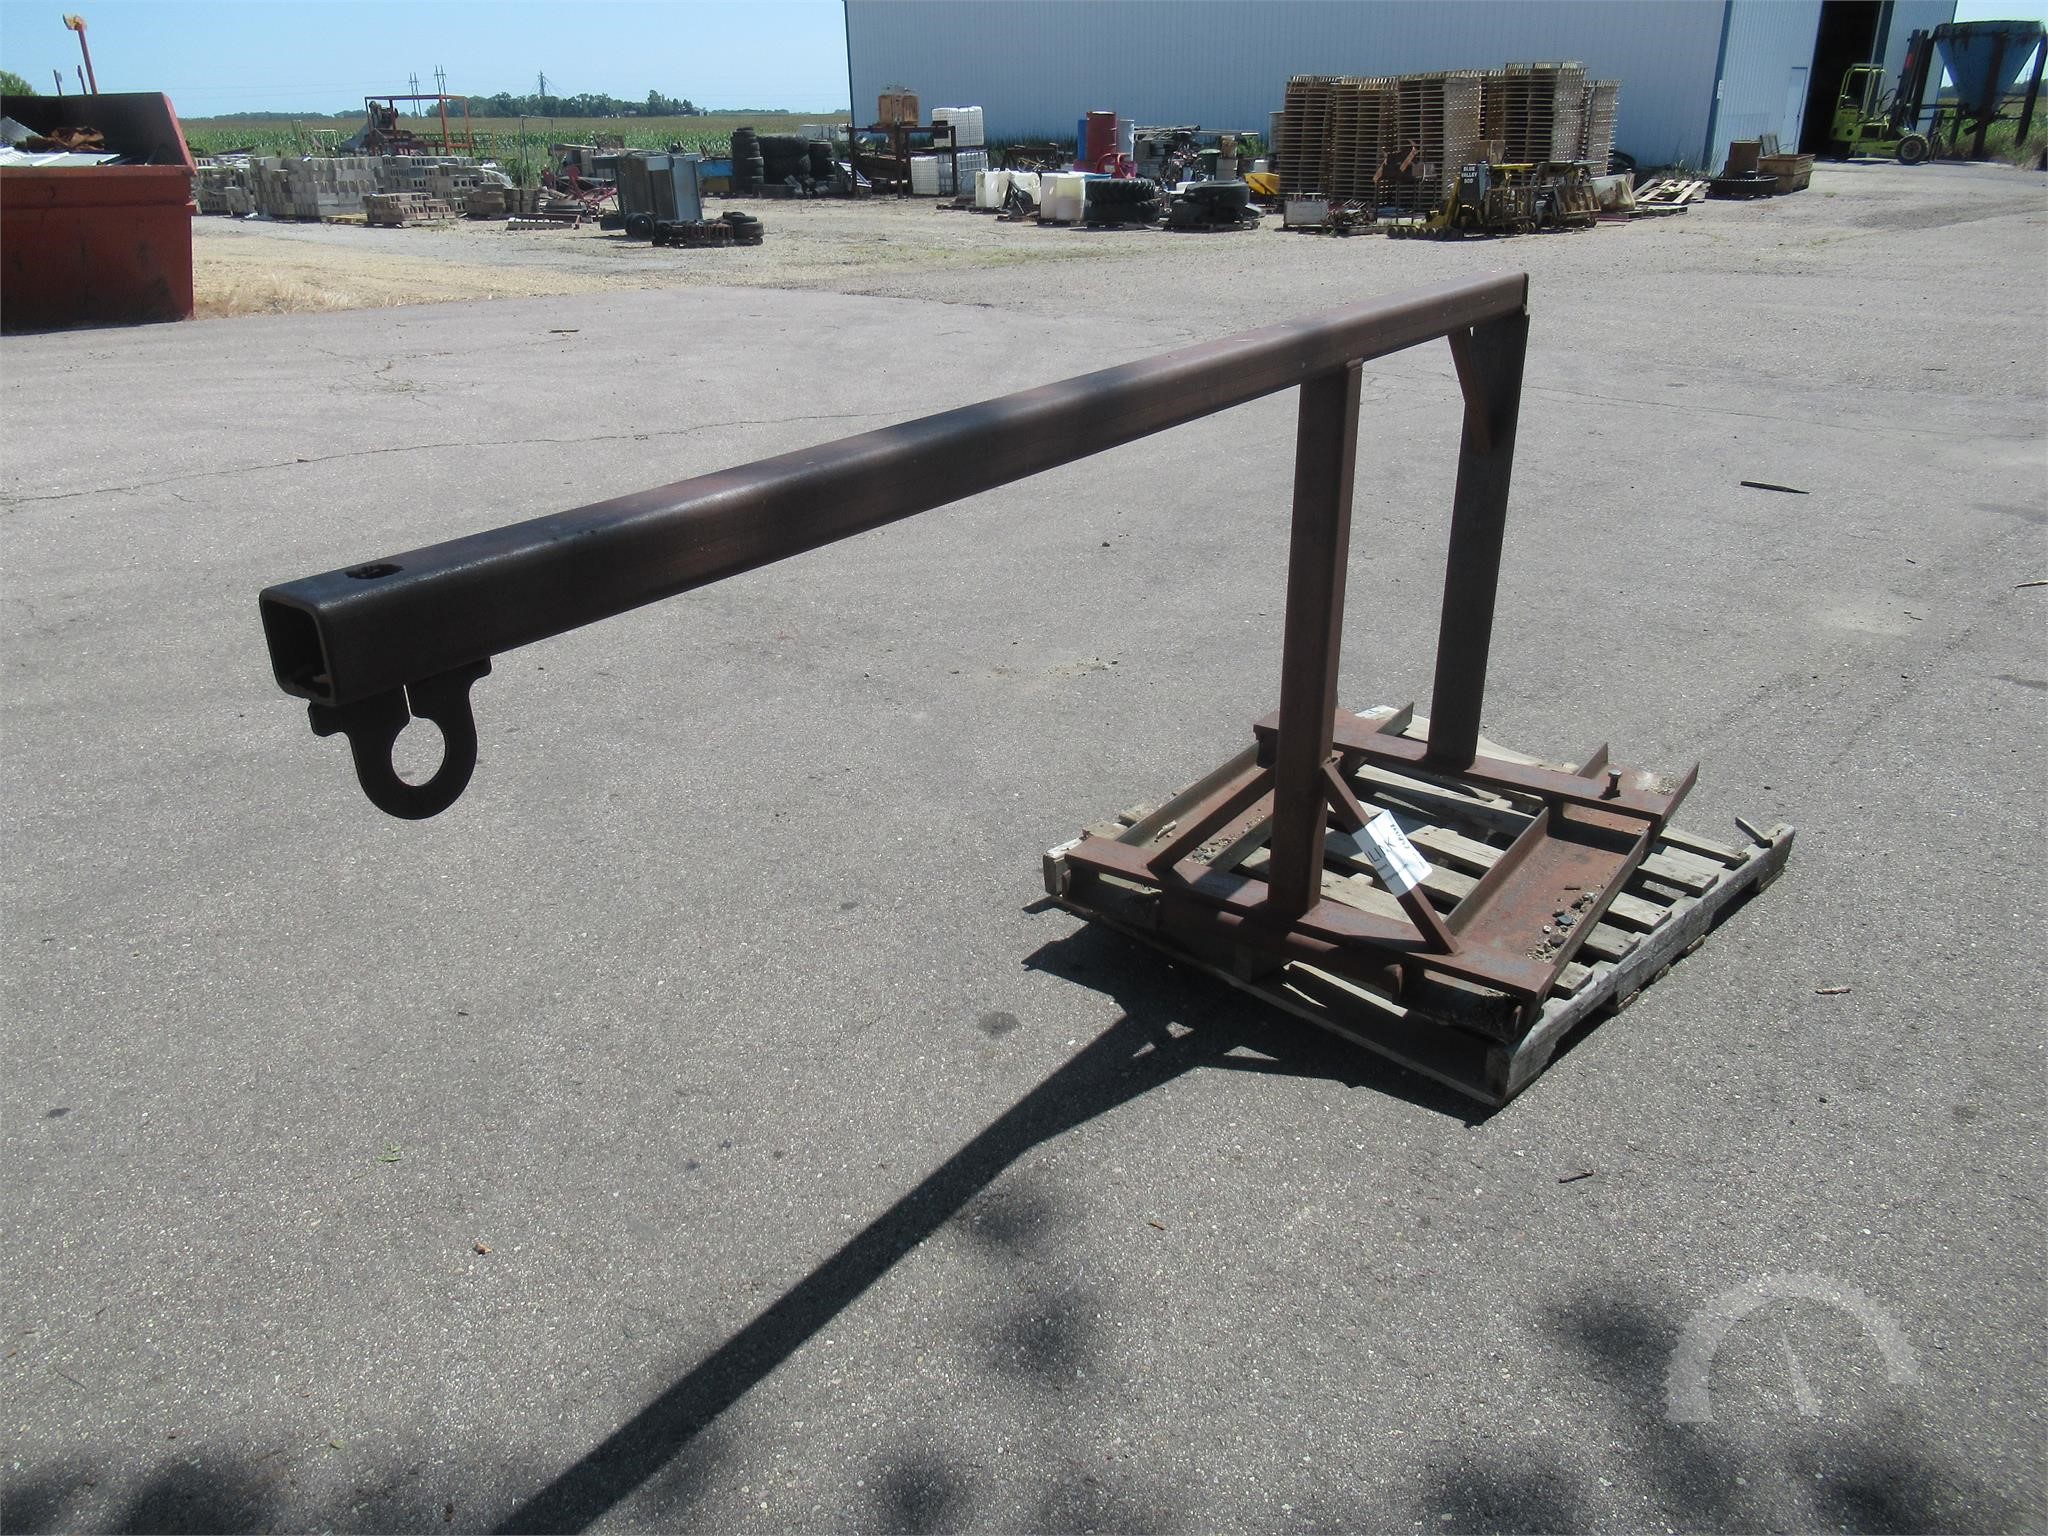 Homemade Metalworking Shop / Warehouse Auction Results - 1 